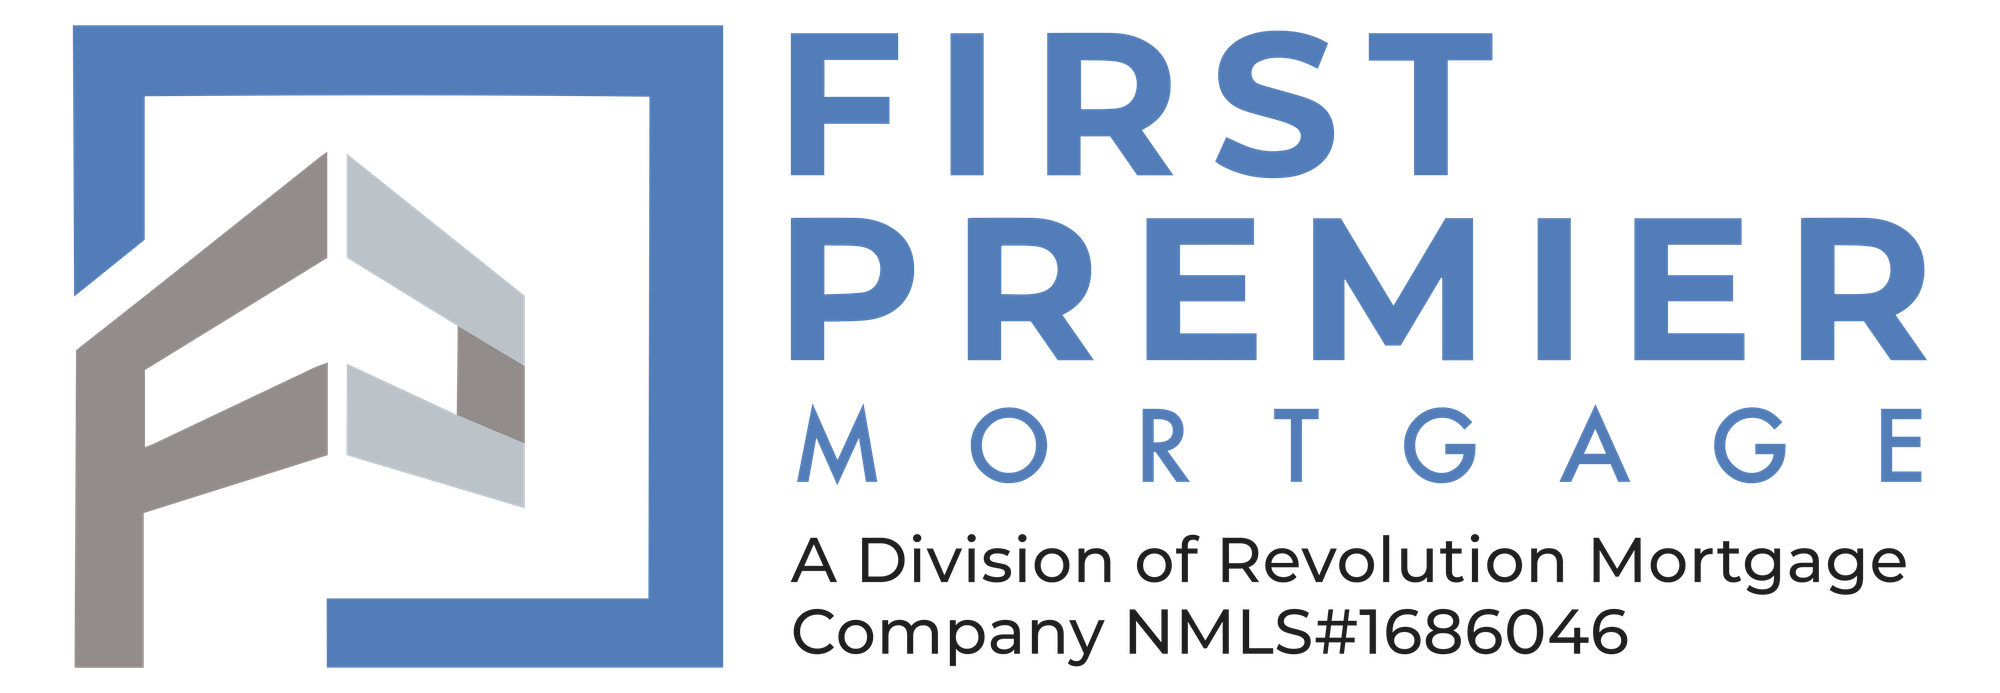 First Premier Mortgage